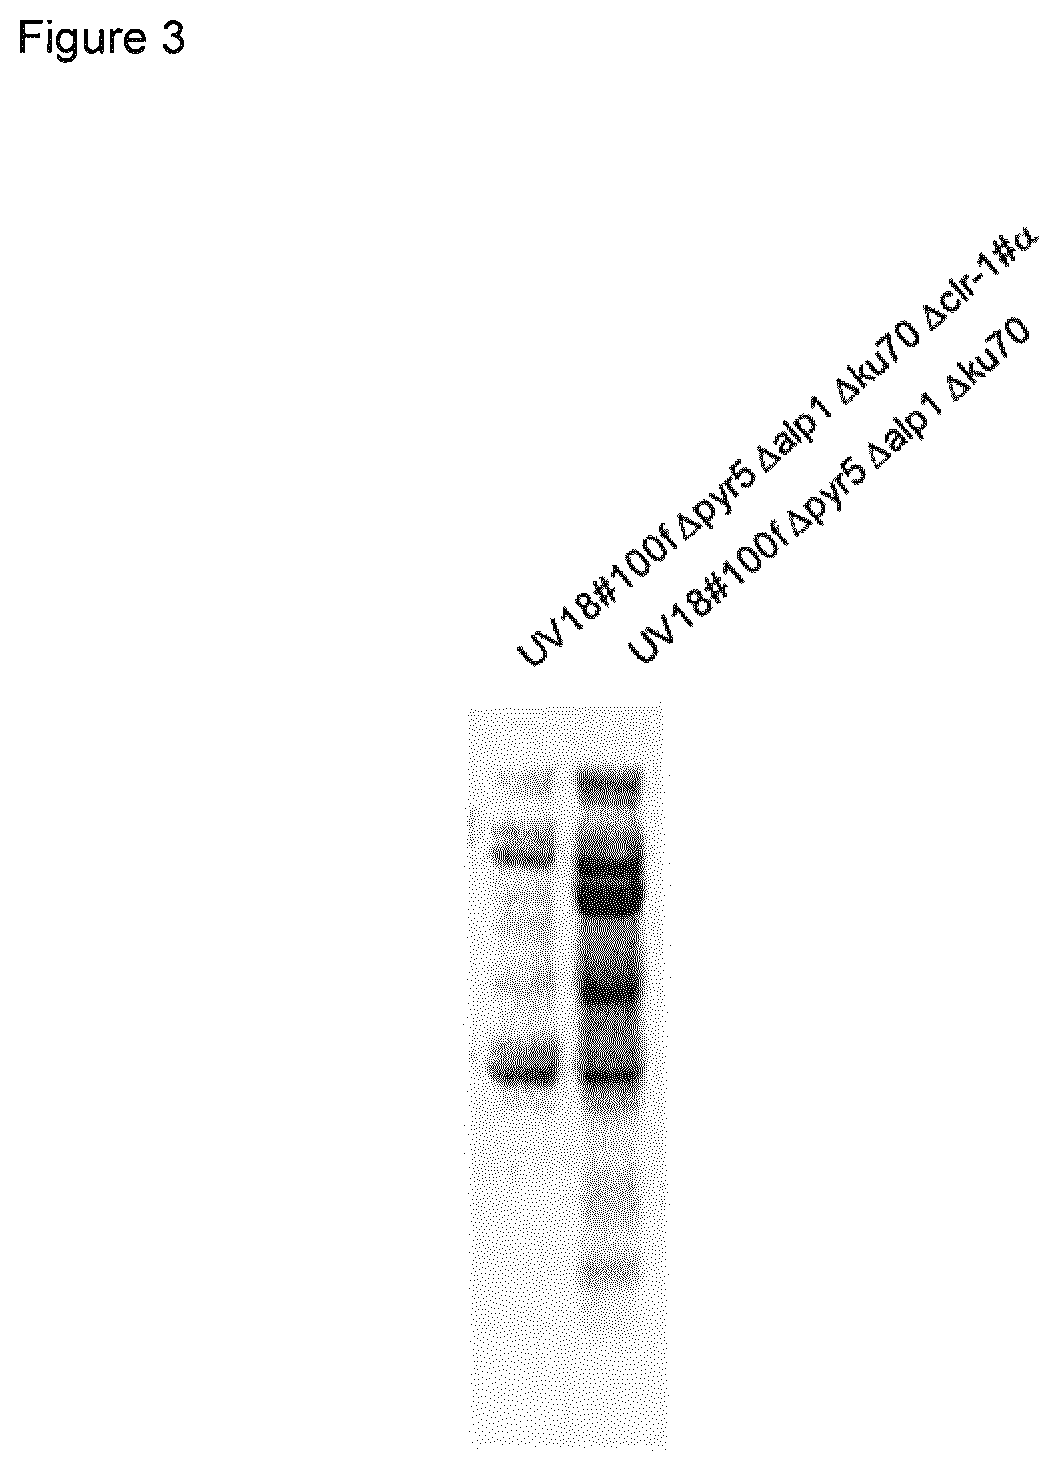 Method of producing proteins in filamentous fungi with decreased CLR1 activity